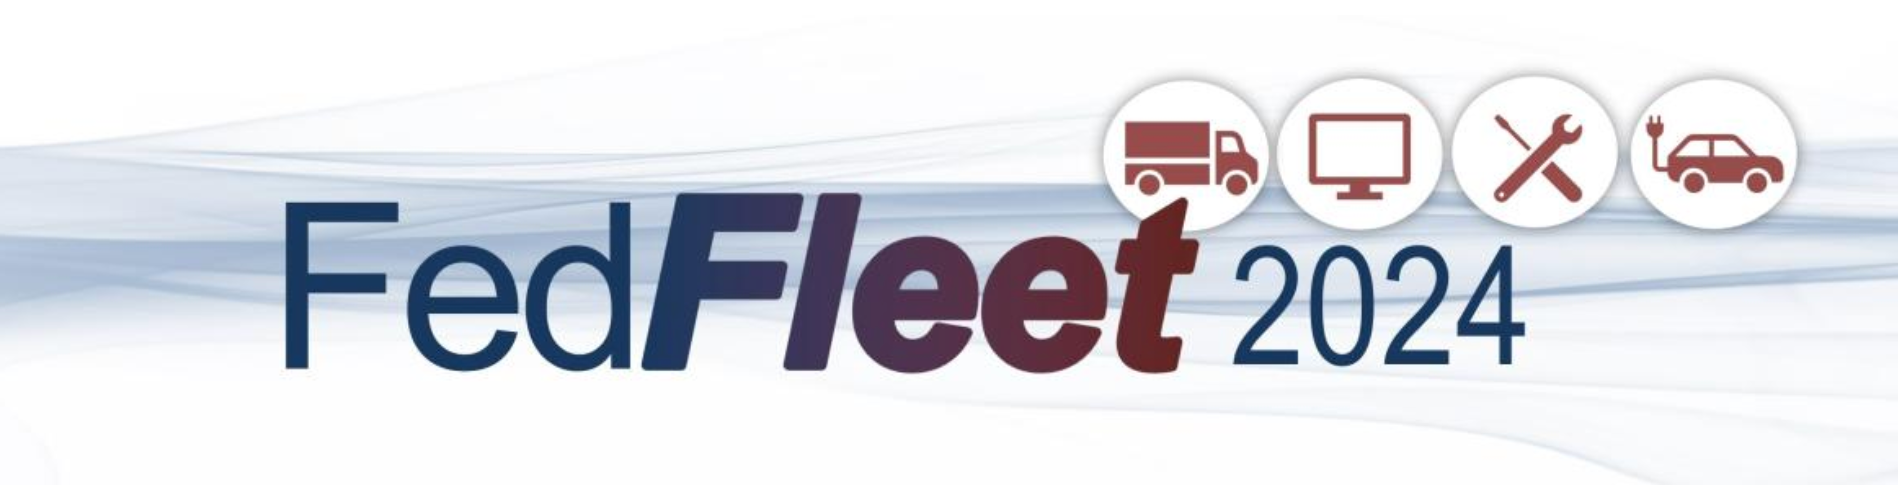 a logo for fed fleet 2024 is shown on a white background